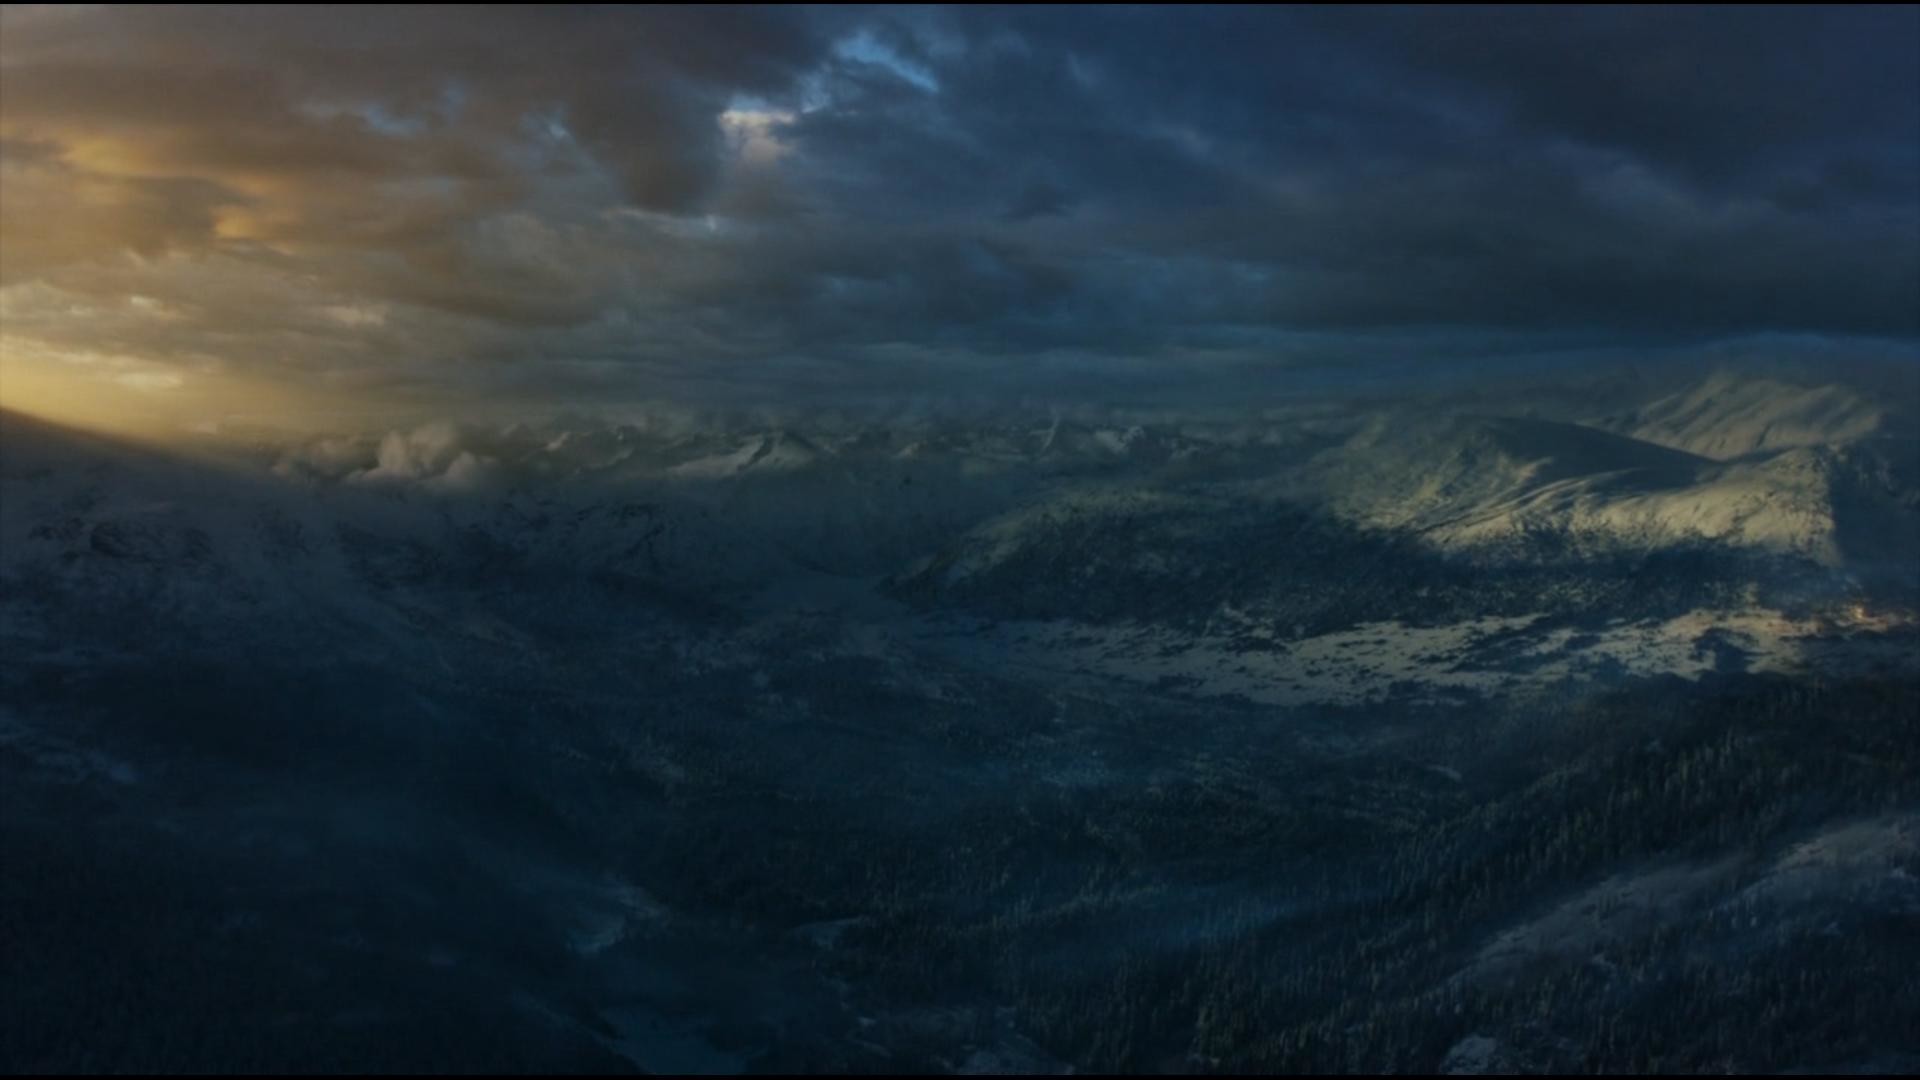 Looking North over the Wall from Game of Thrones Season 3, Episode 6